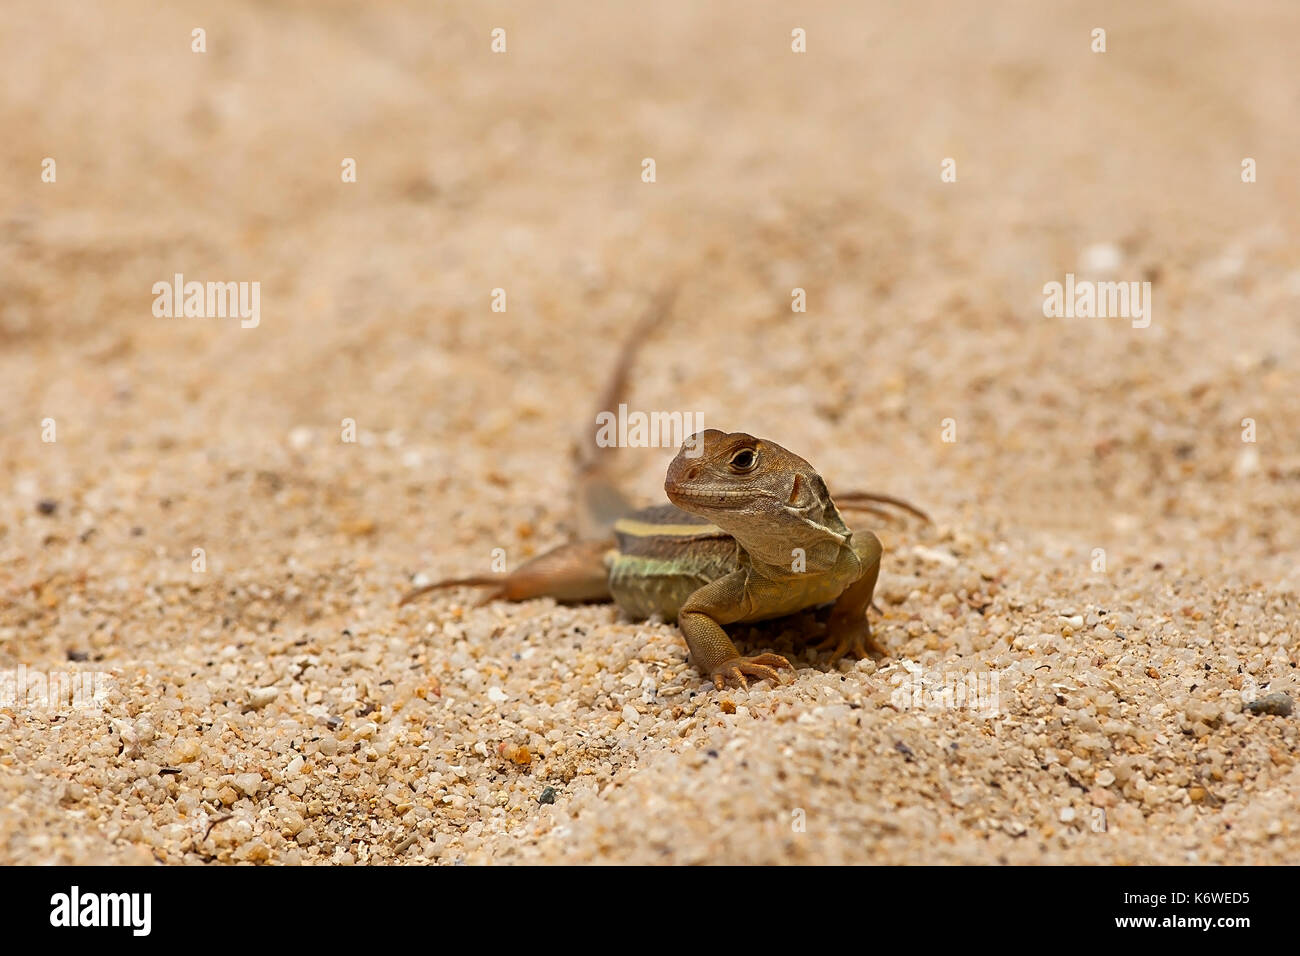 Common butterfly lizard (Leiolepis belliana), in sand, Hong Ong Island, Vietnam Stock Photo